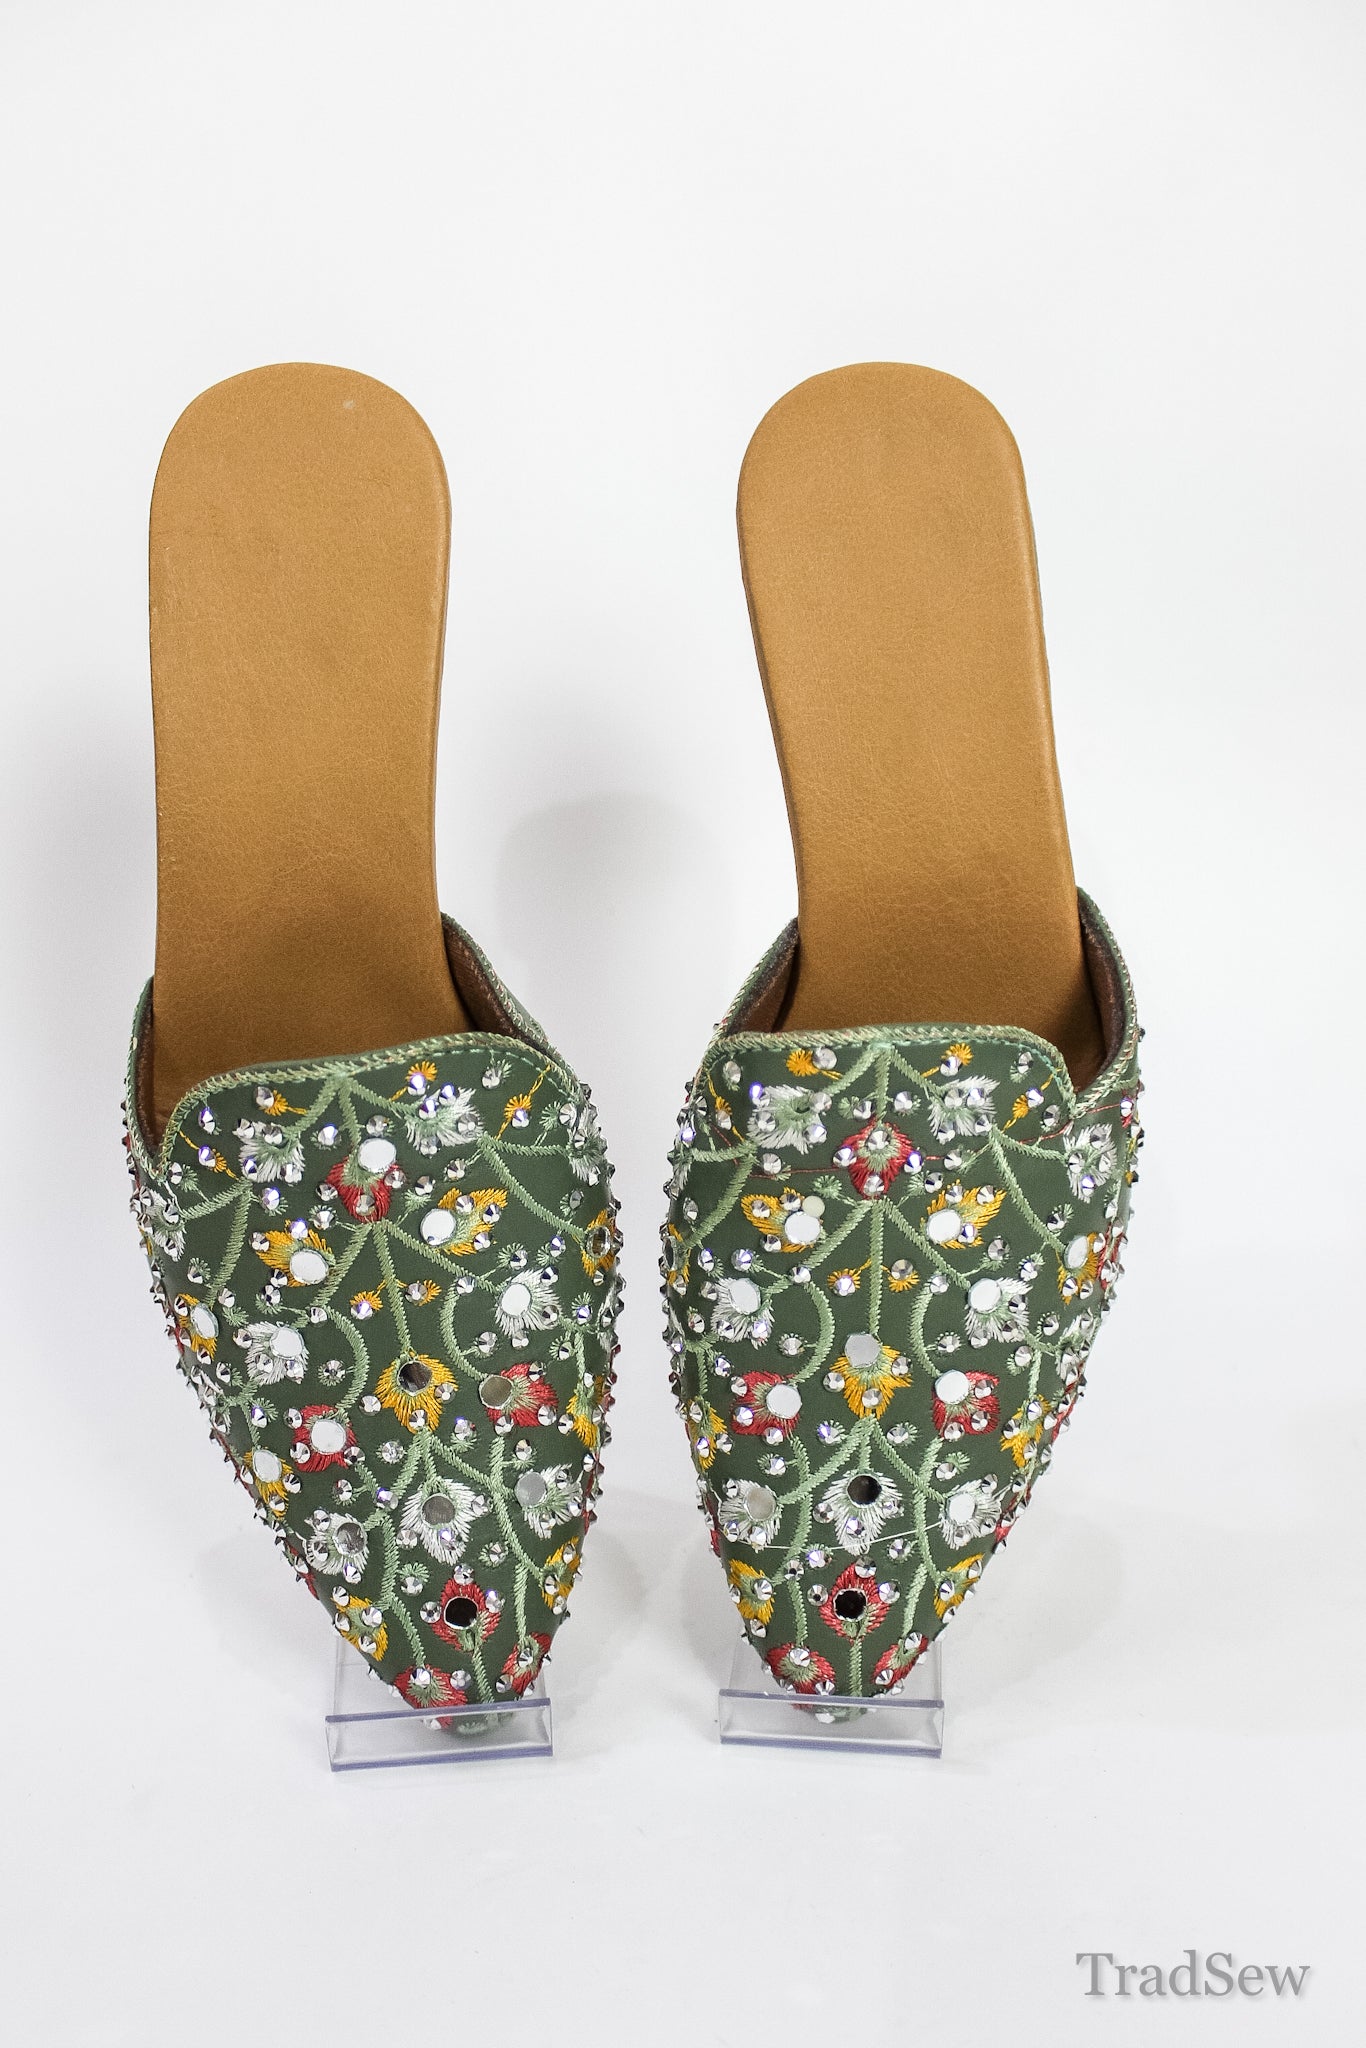 Garden Splendor Embroidered Mules by Tradsew